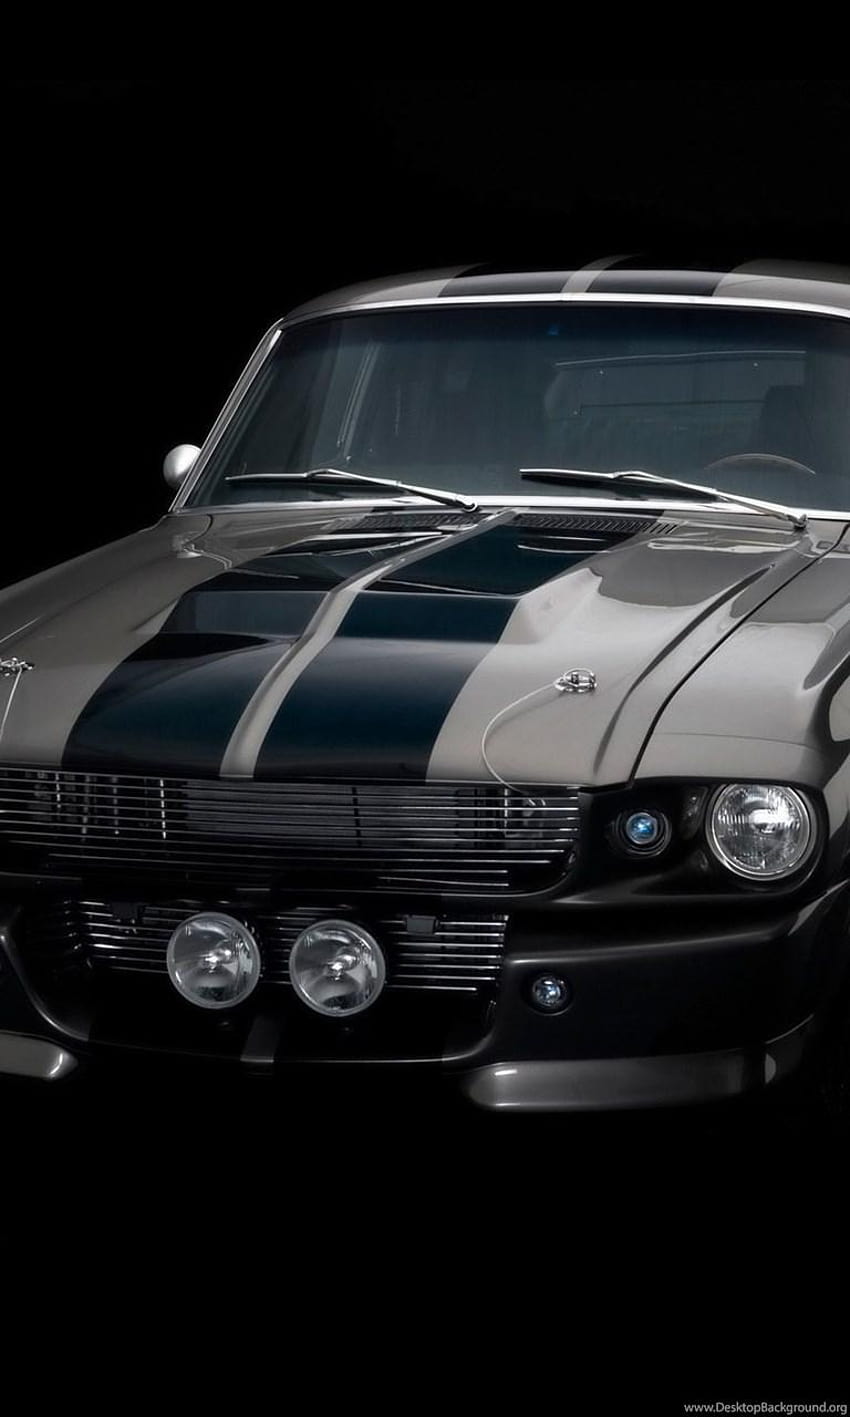 Cars Muscle Cars Eleanor Ford Mustang Shelby GT500, 1967 ford mustang shelby gt500 iphone HD phone wallpaper